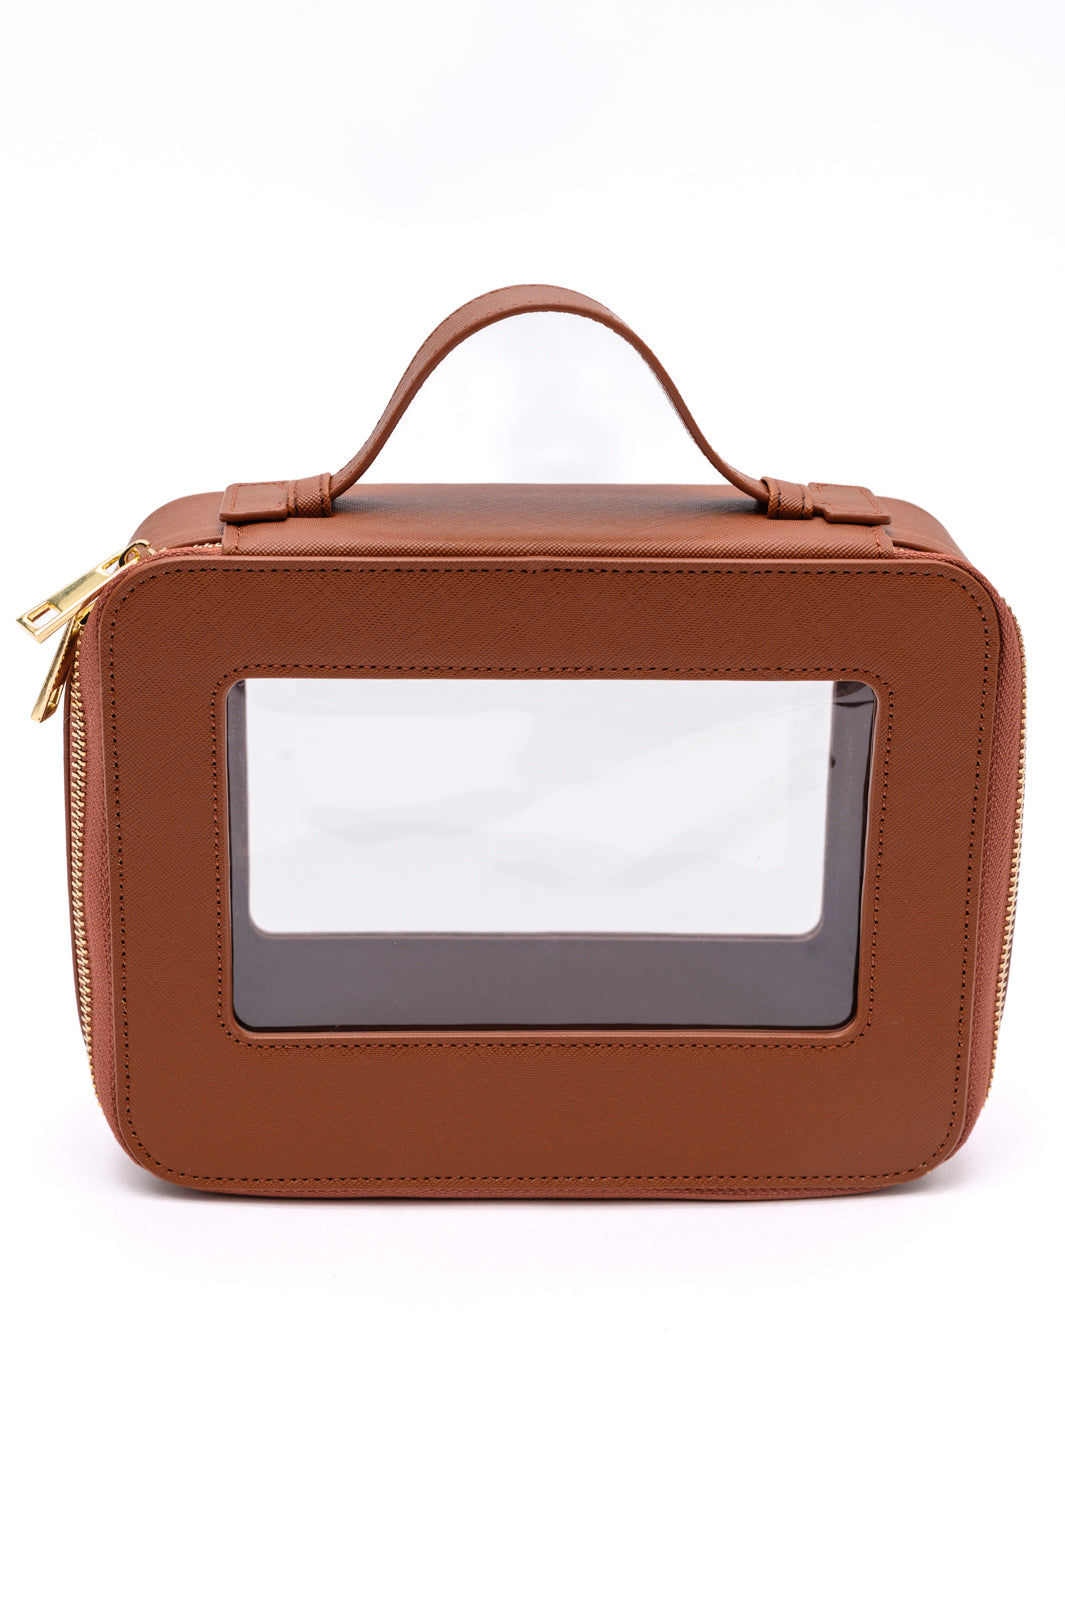 PU Leather Travel Cosmetic Case in Camel **FINAL SALE**